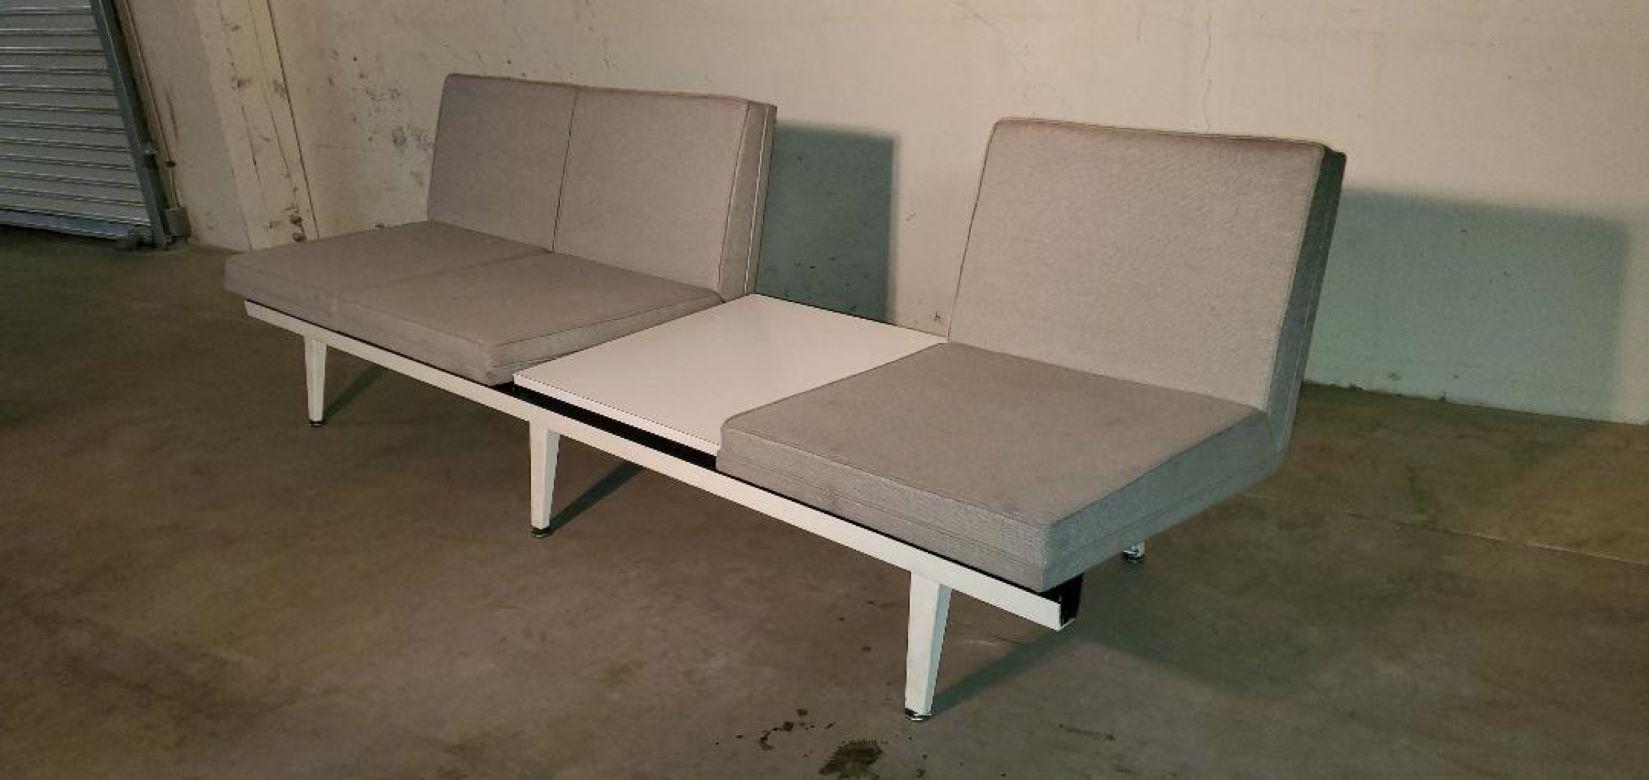 20th Century 1950s George Nelson Steel Frame Sofa by Herman Miller Vintage Mid-Century Modern For Sale